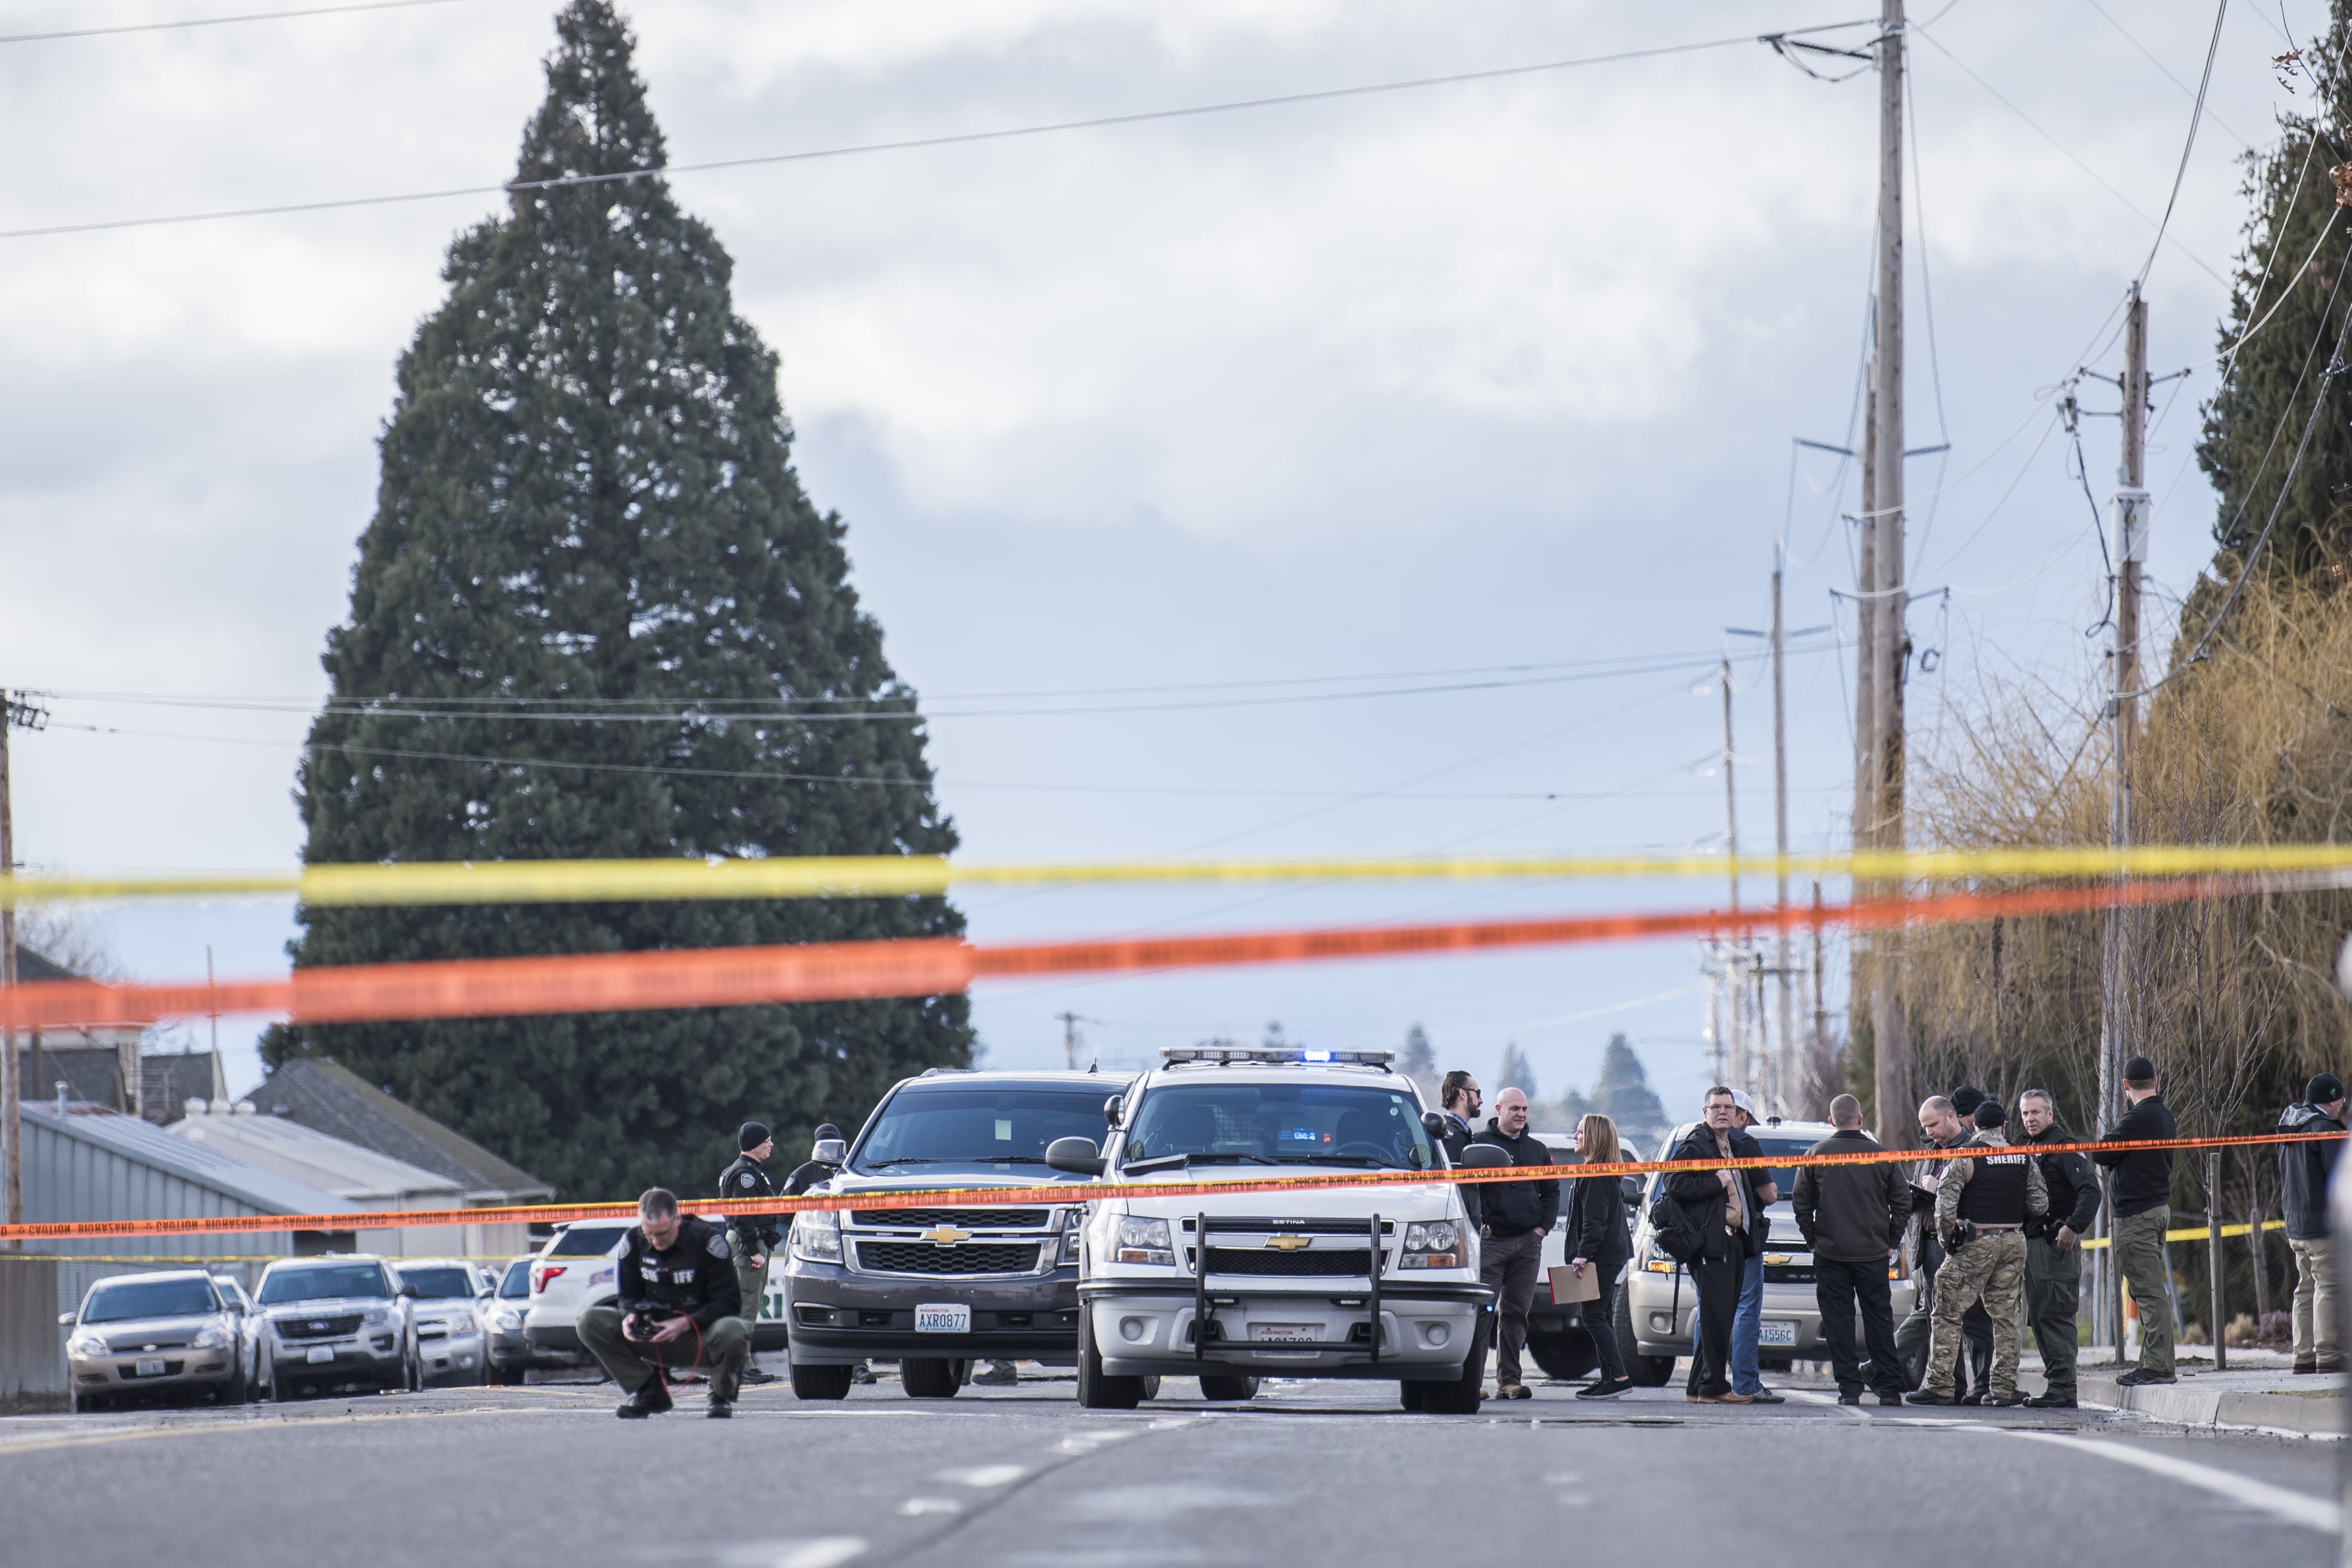 Gallery: Hazel Dell officer-involved shooting photo gallery